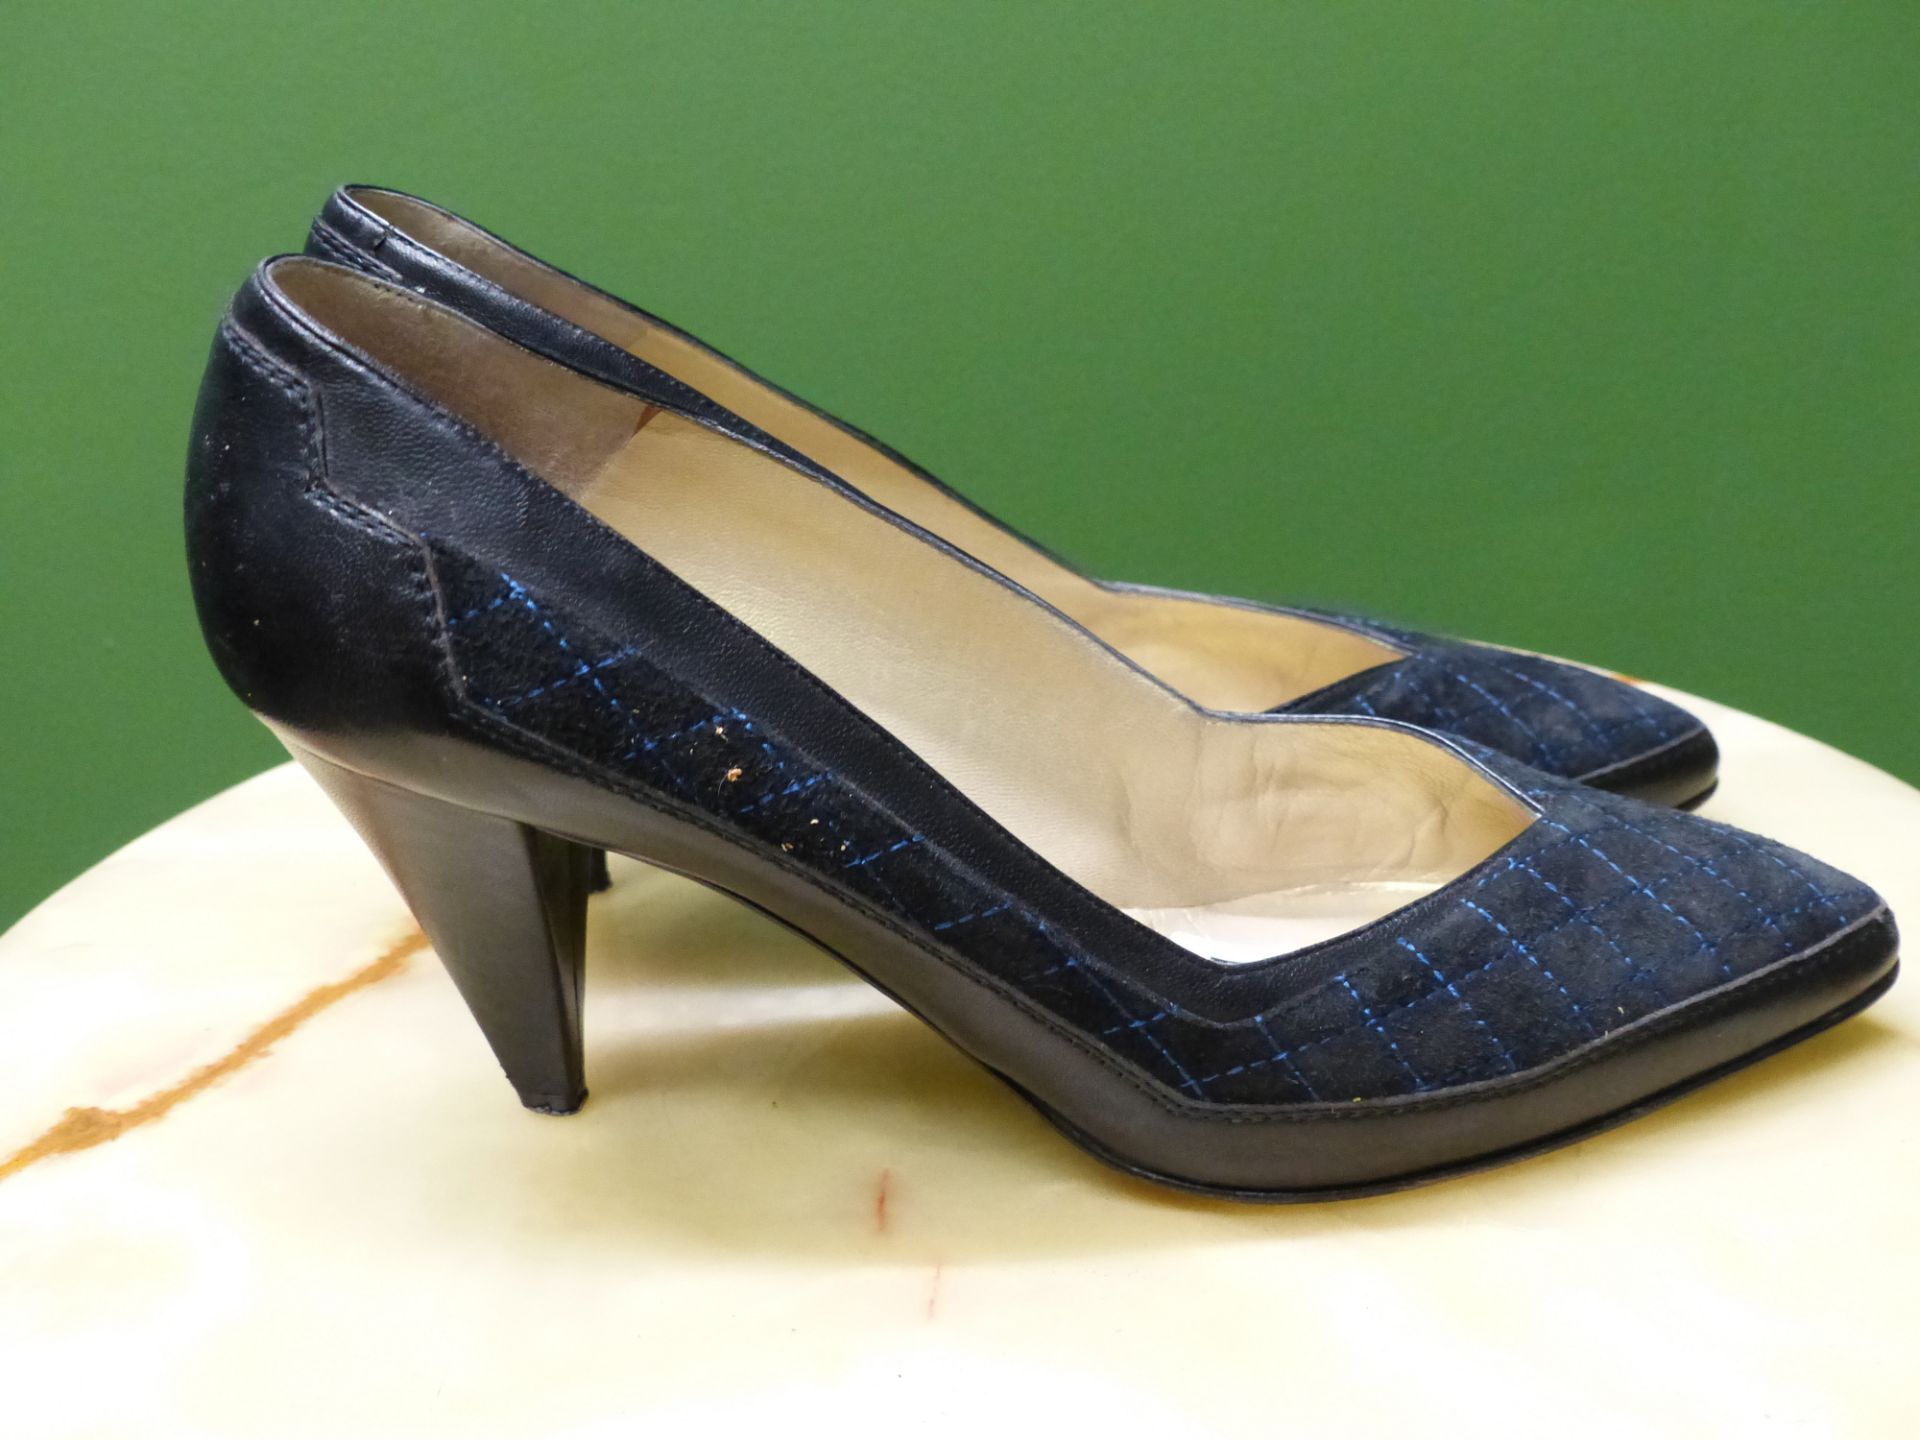 SHOES. GIANNI VERSACE ITALIAN BLACK WITH NAVY STITCH HEELS. EURO SIZE 39. HEEL HEIGHT 8cm. - Image 3 of 8